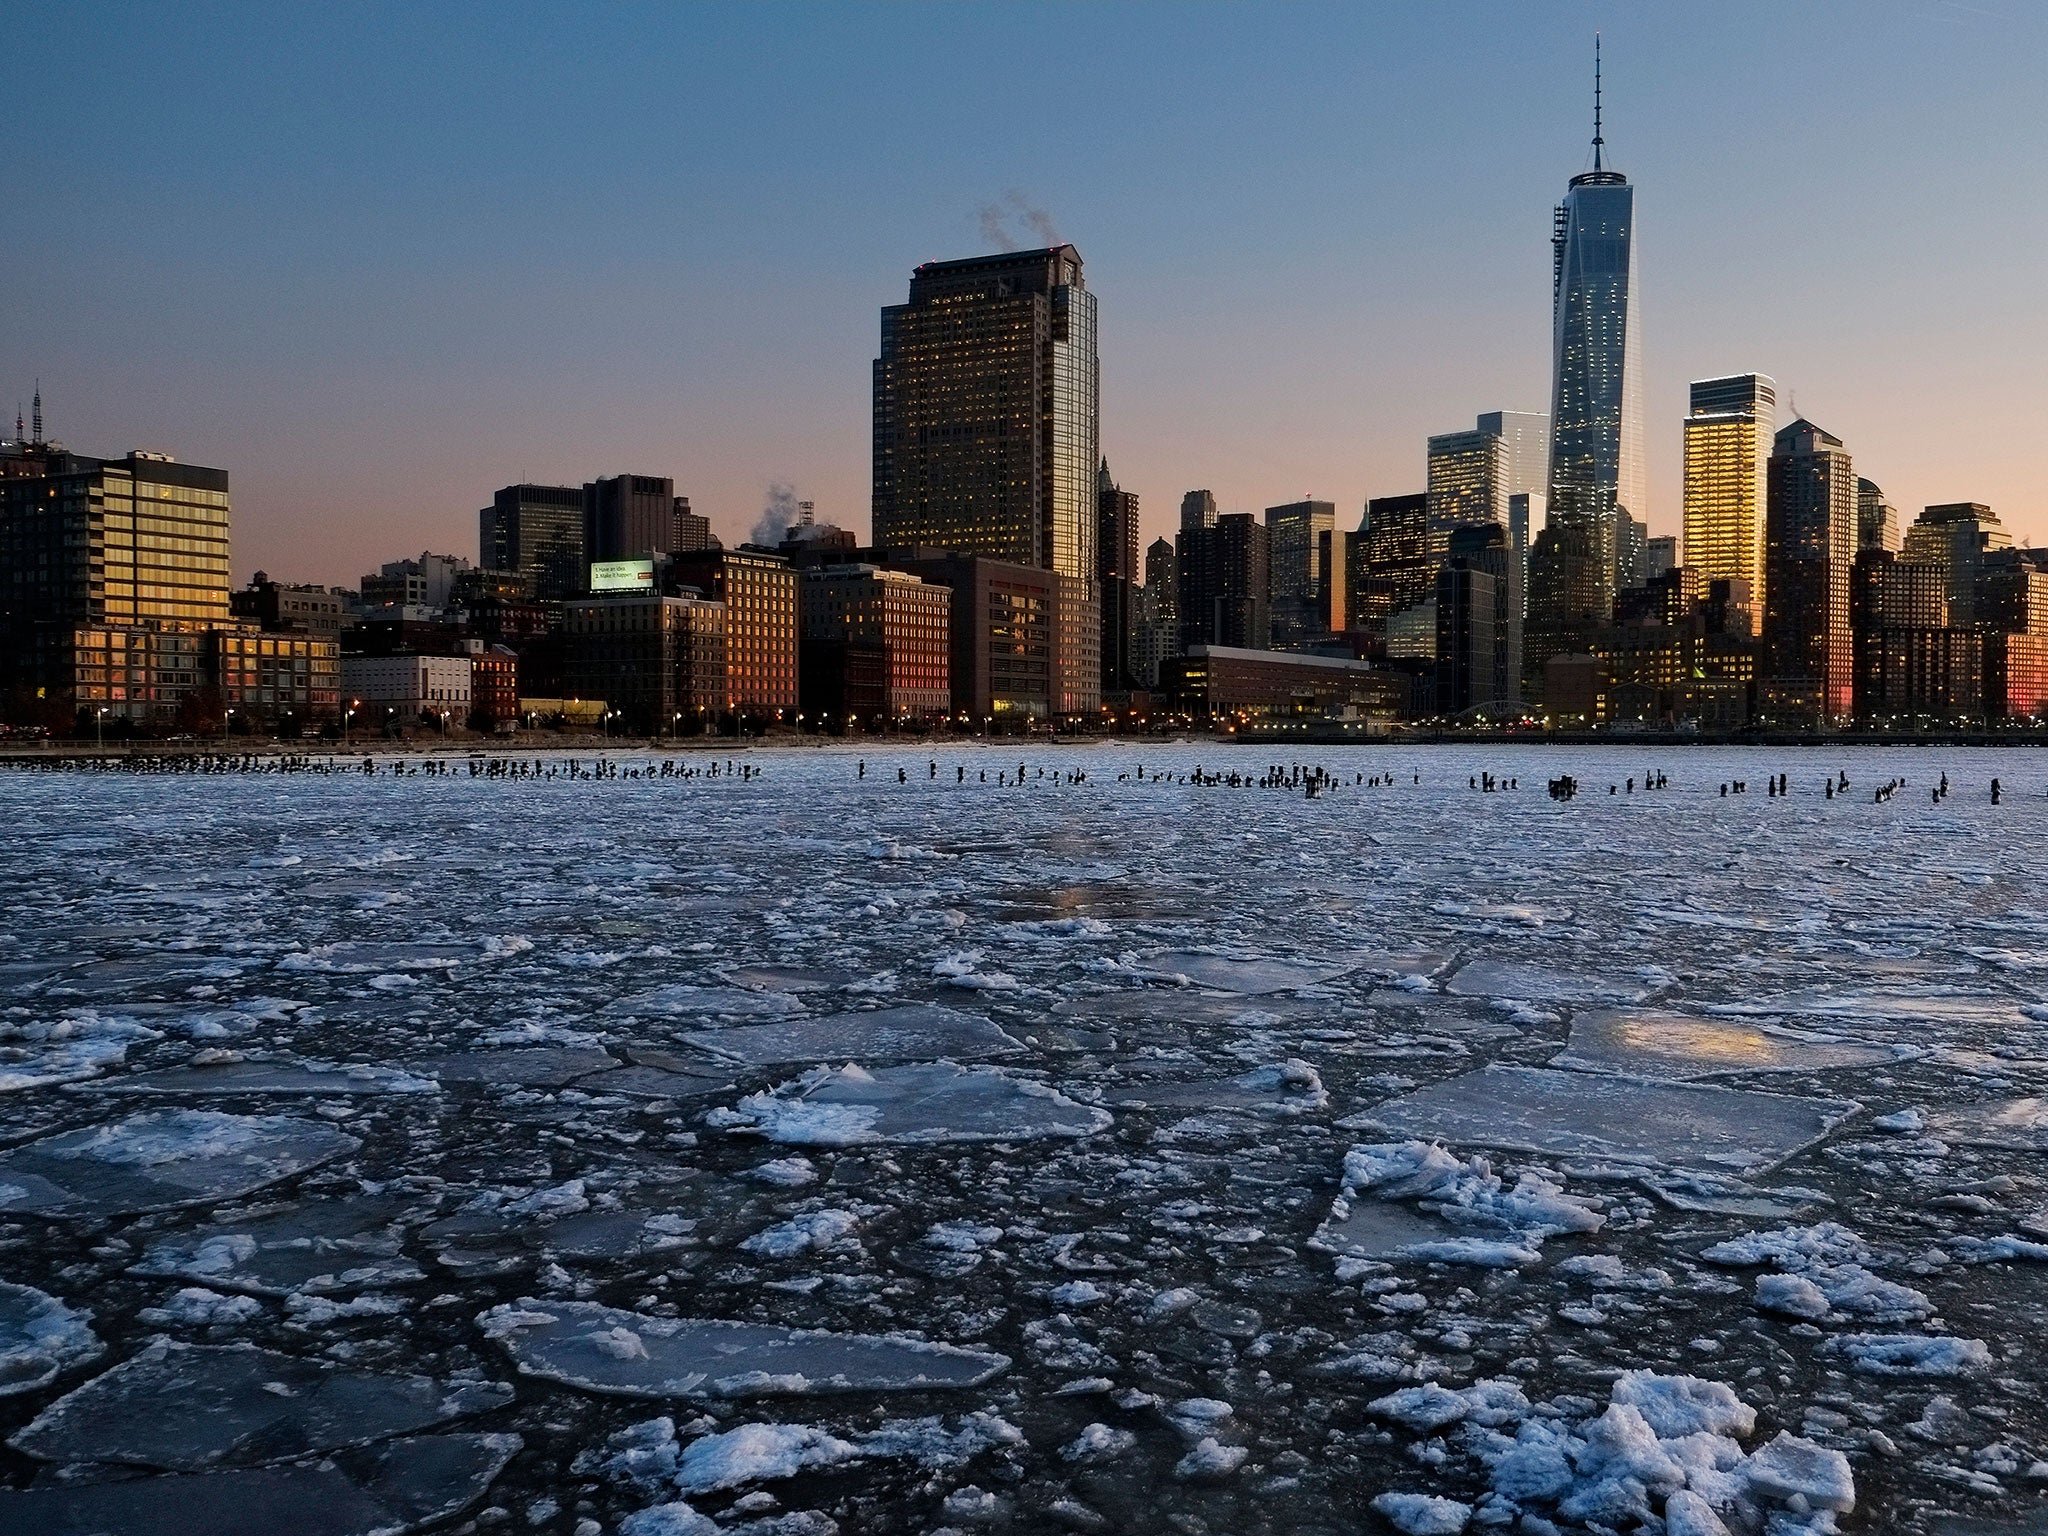 Ice floes fill the Hudson River as the Lower Manhattan skyline is seen during the 'Polar vortex' last January in New York